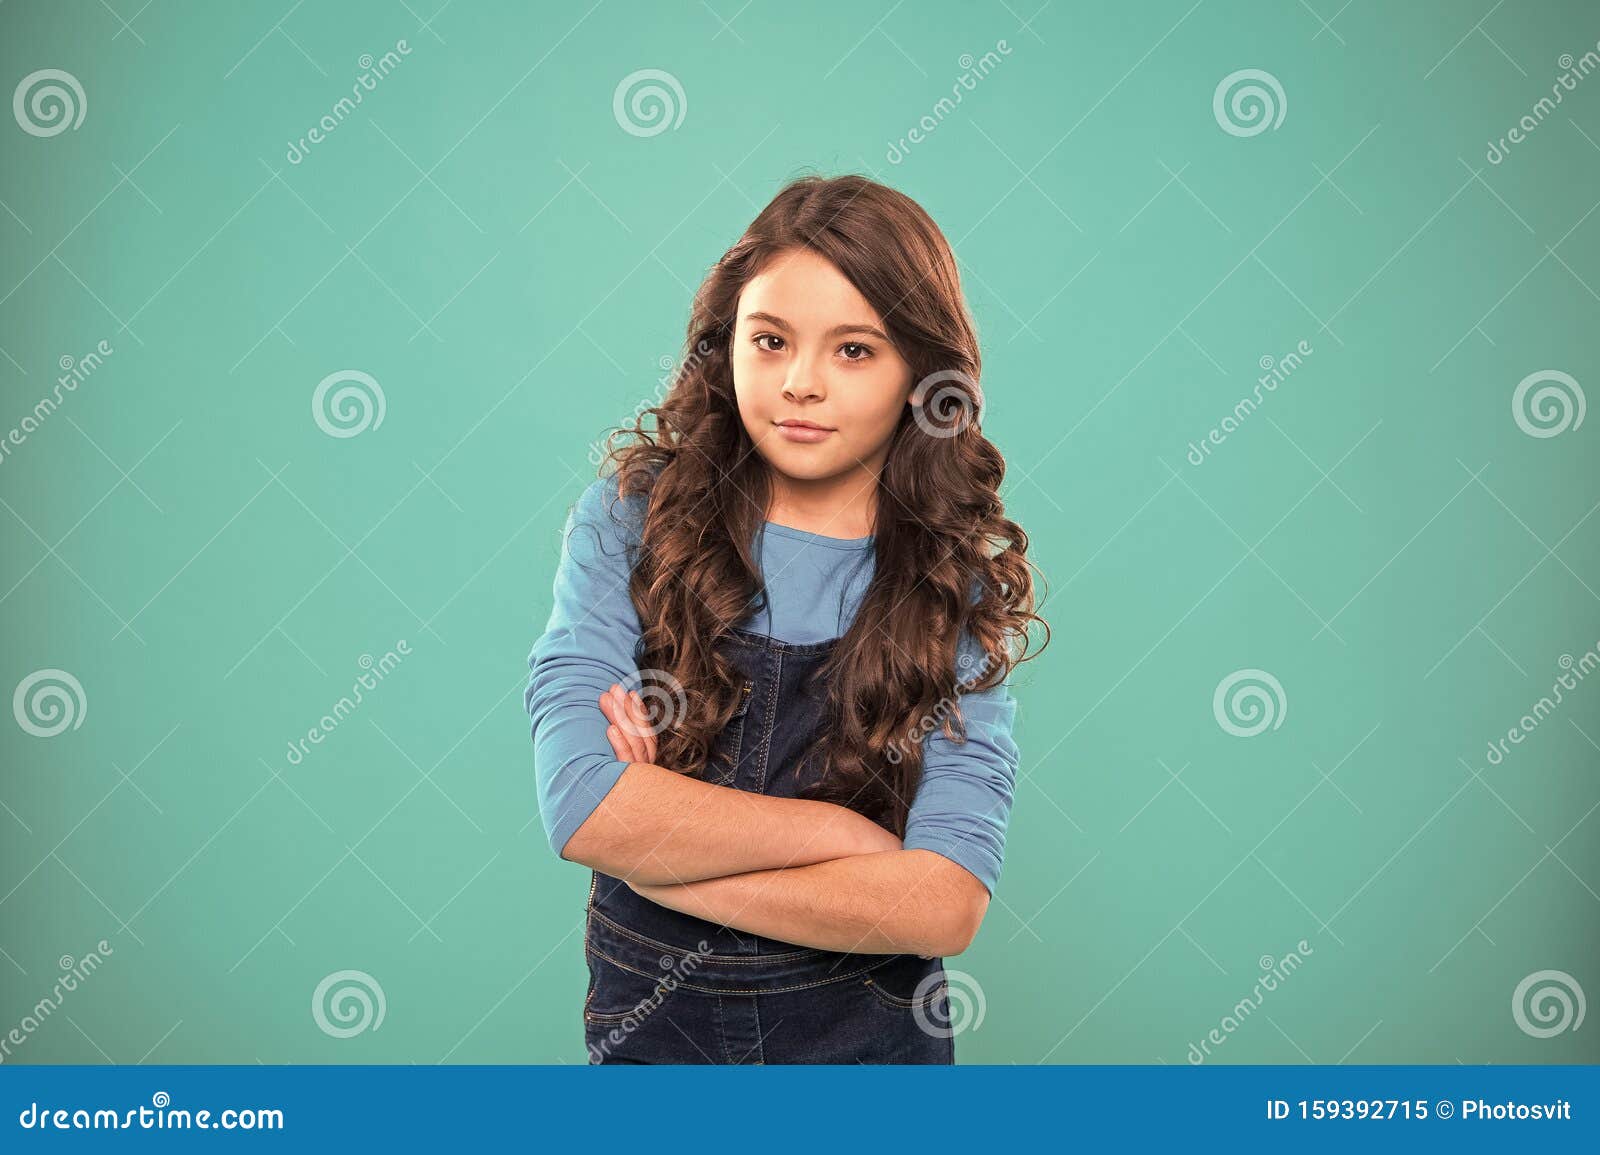 Upbringing Confidence. Kid Girl Long Hair Posing Confidently. Girl Curly  Hairstyle Feels Confident Stock Image - Image of confidently, curly:  159392715